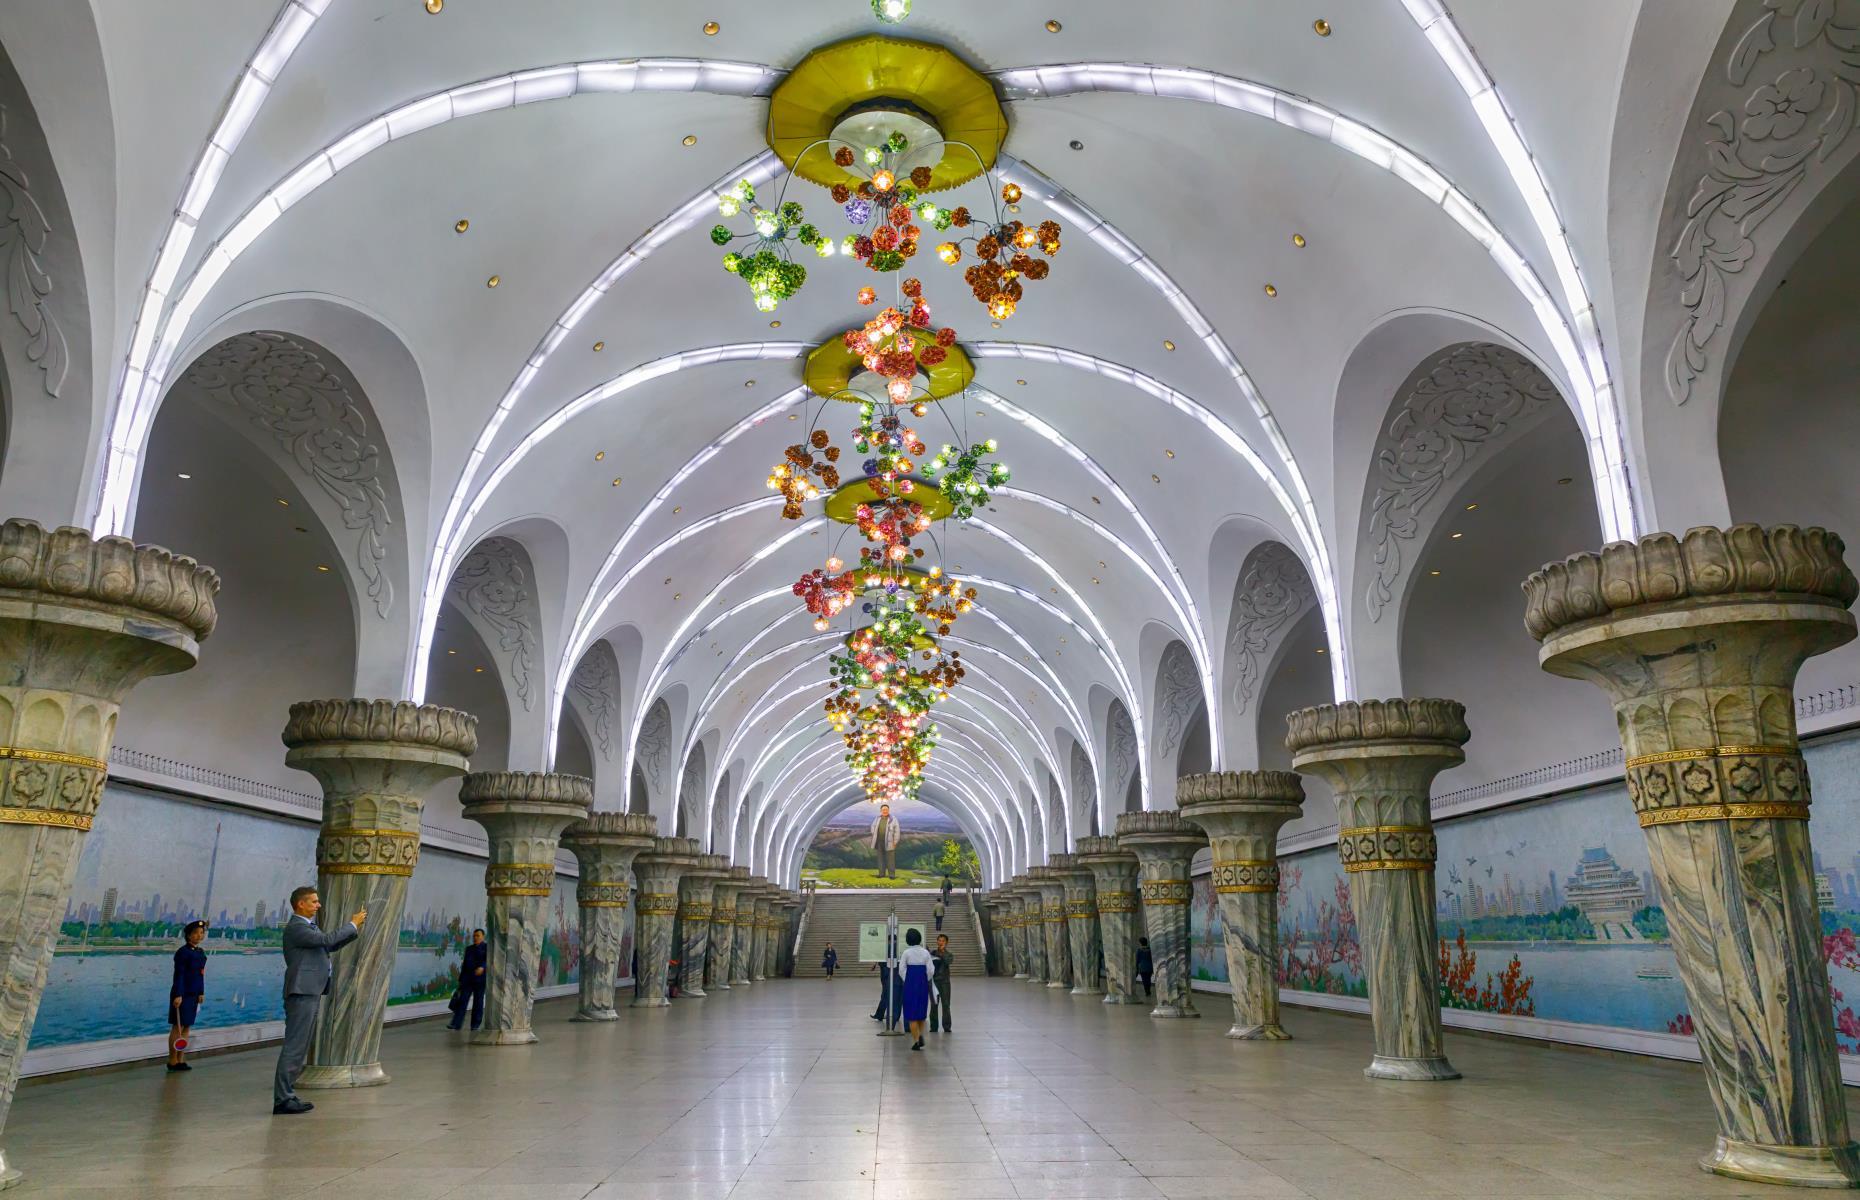 <p>Consisting of two lines, Pyongyang metro system is one of the deepest in the world. Opened in 1973, it’s a truly remarkable example of socialist realism as propaganda murals adorn the walls while golden statues of the country’s great leaders watch over the commuters.</p>  <p><strong><a href="https://www.loveexploring.com/galleries/65684/what-its-really-like-to-travel-to-north-korea?page=1">Find out what it's really like to be a tourist in North Korea here</a></strong></p>